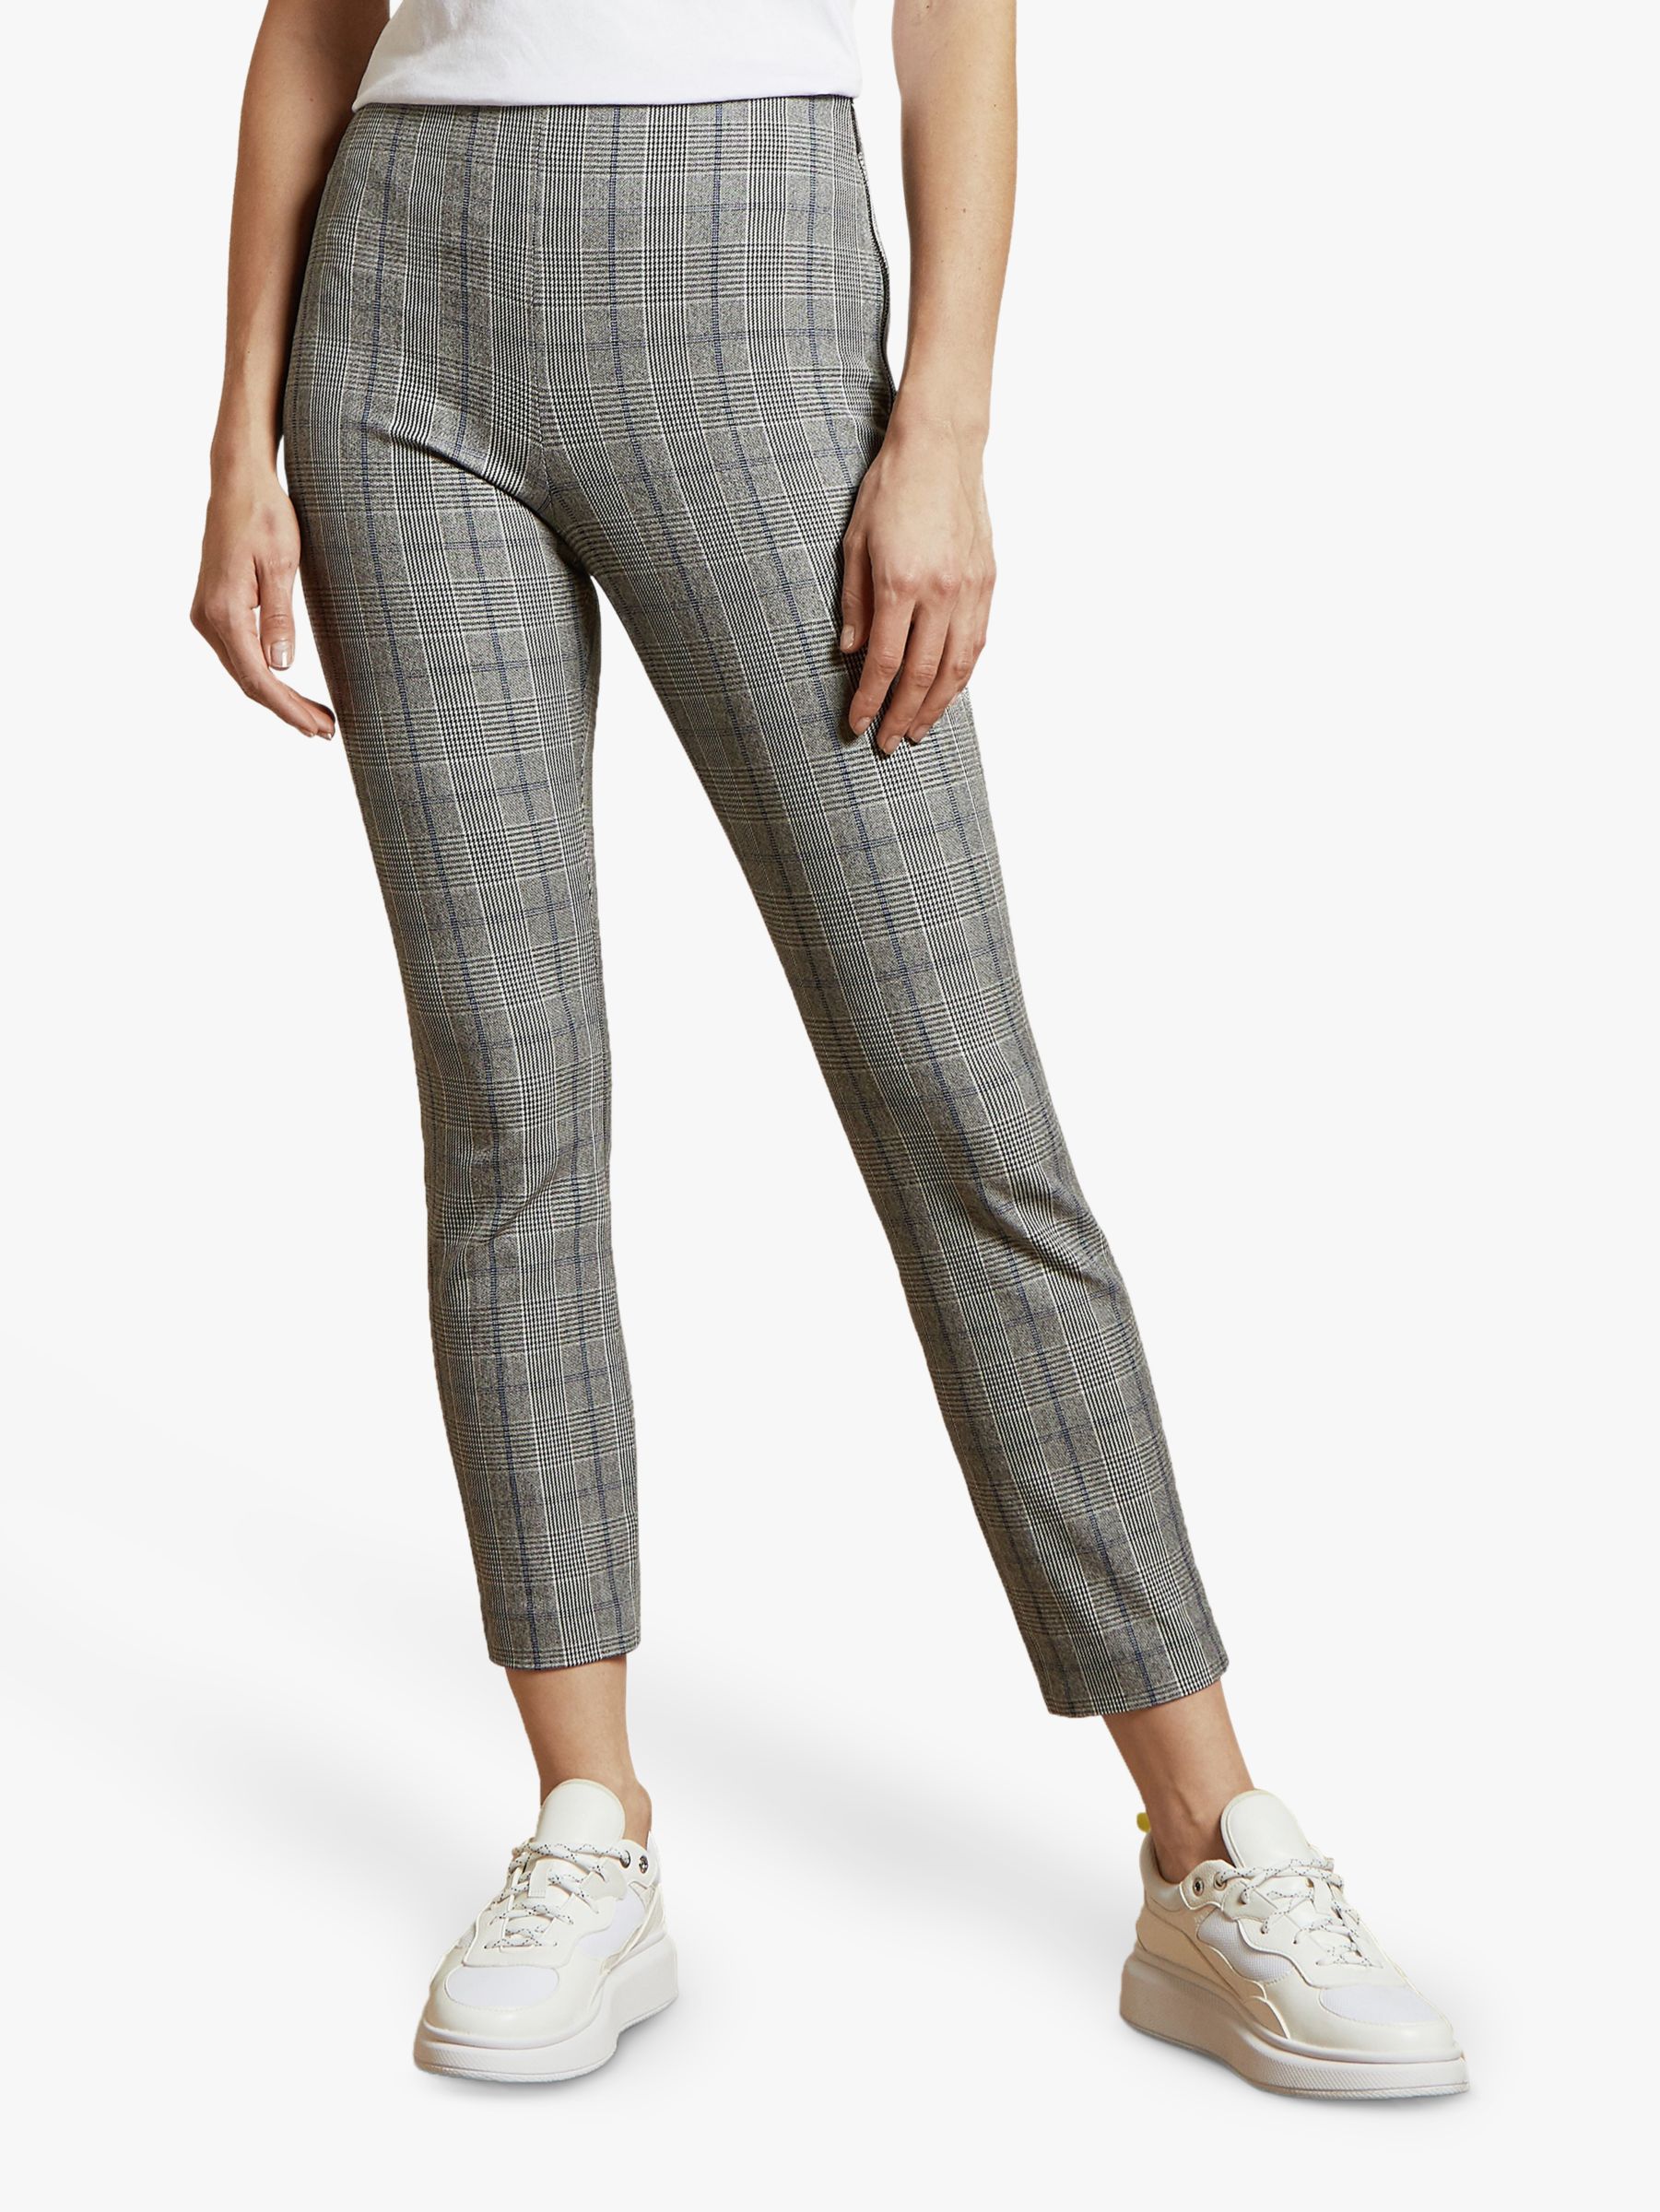 Ted Baker Banria Check Skinny Check Trousers, Grey Mid